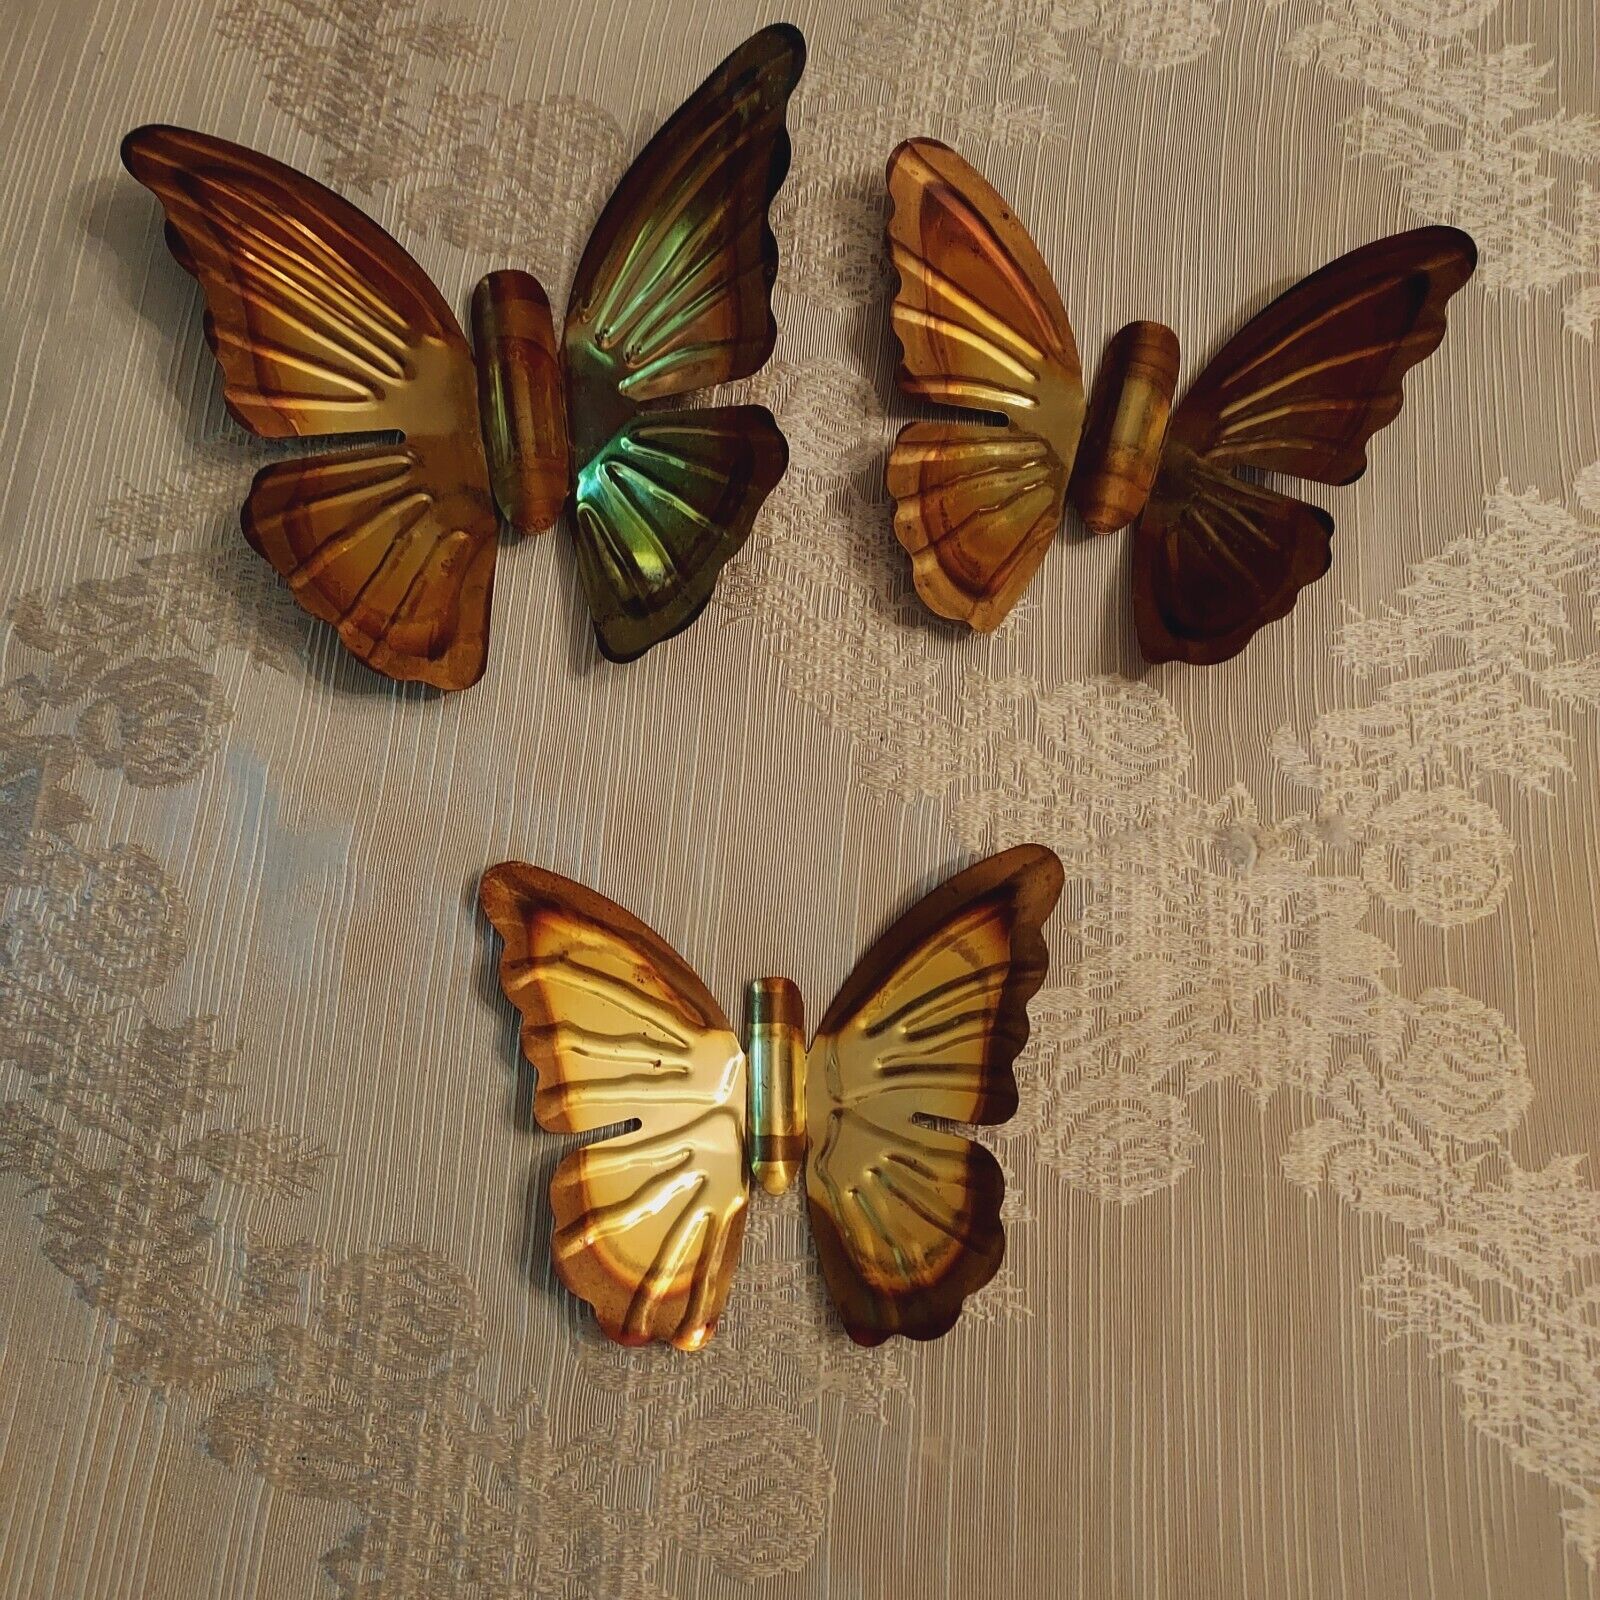 Vintage Butterfly Wall Hanging Set of 3 Brass-Tone Metal Winged MCM Decor 1970's